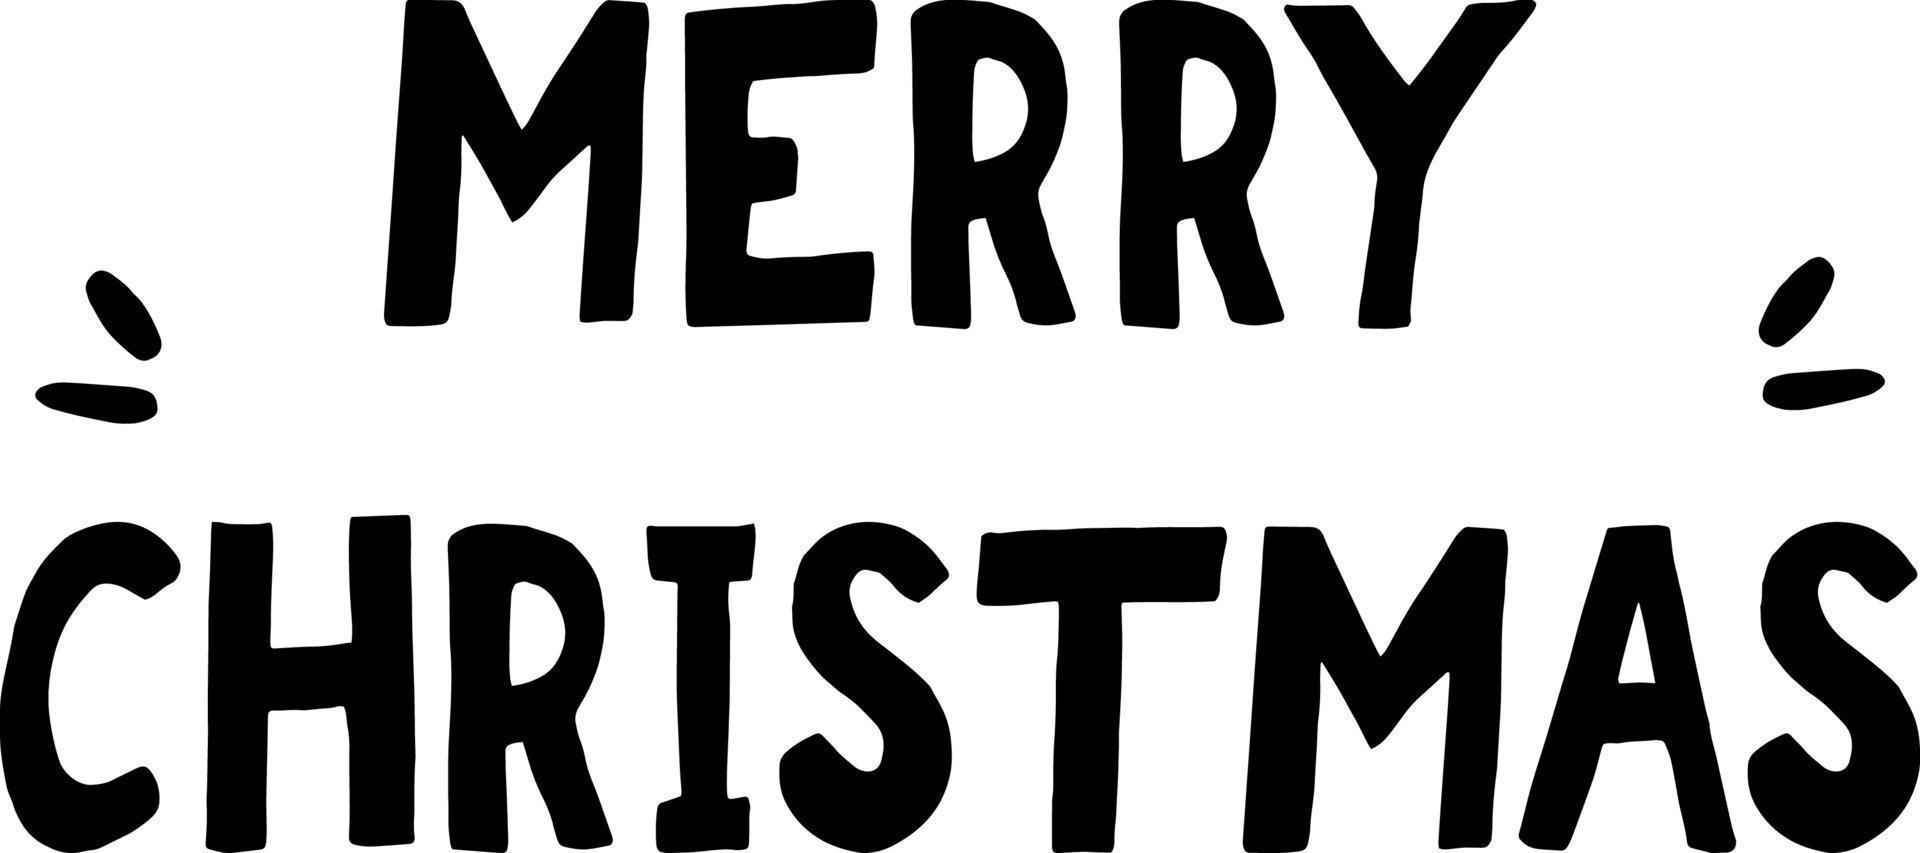 merry christmas lettering sketch hand drawn doodle. for design card, banner, poster vector